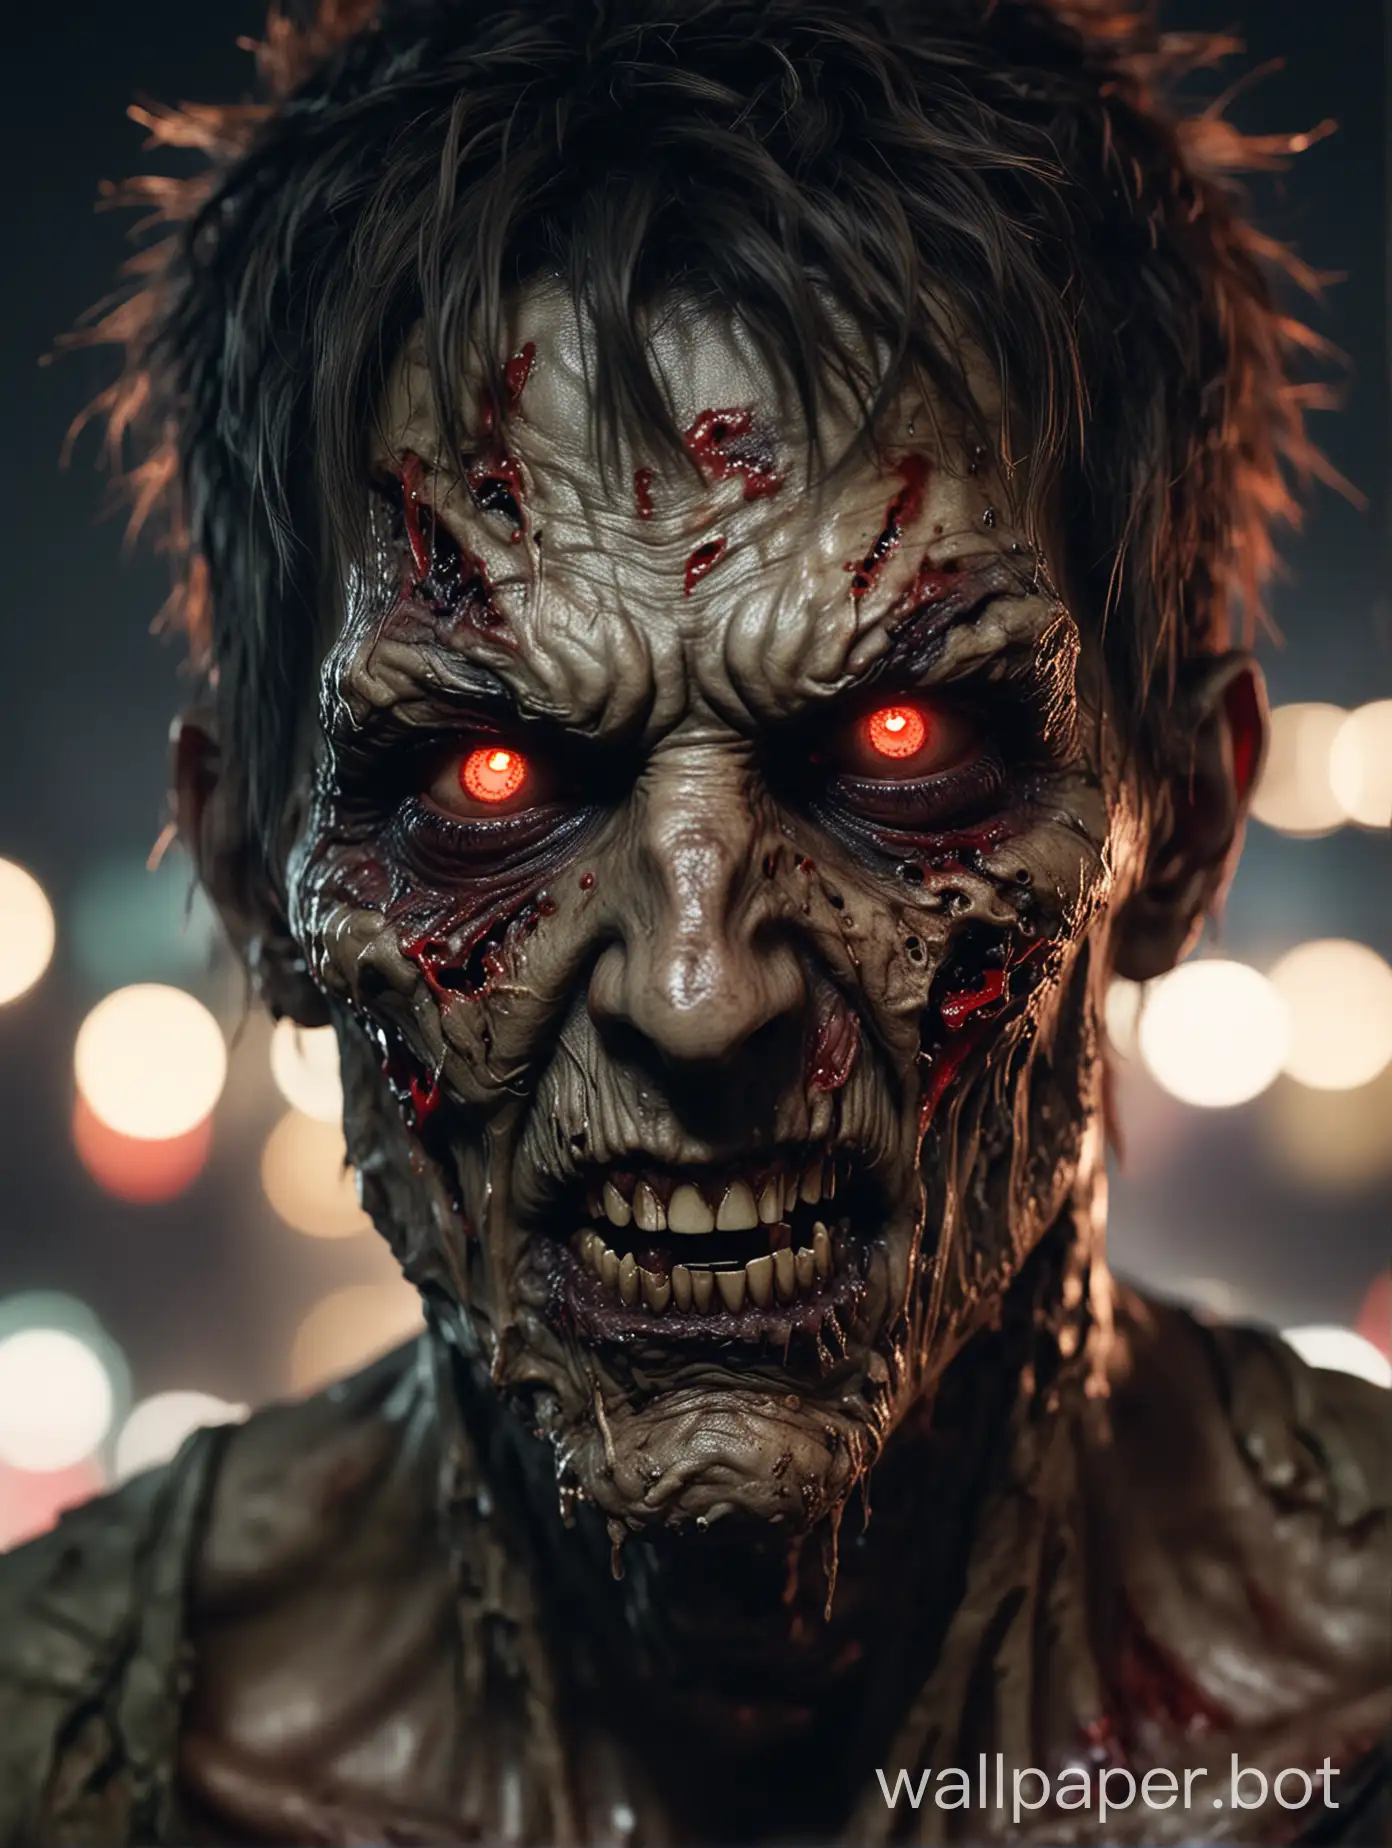 Close-up of a creepy zombie face, Torn cheek sharp teeth, game character with glowy red eyes, against a blurred night cityscape background.